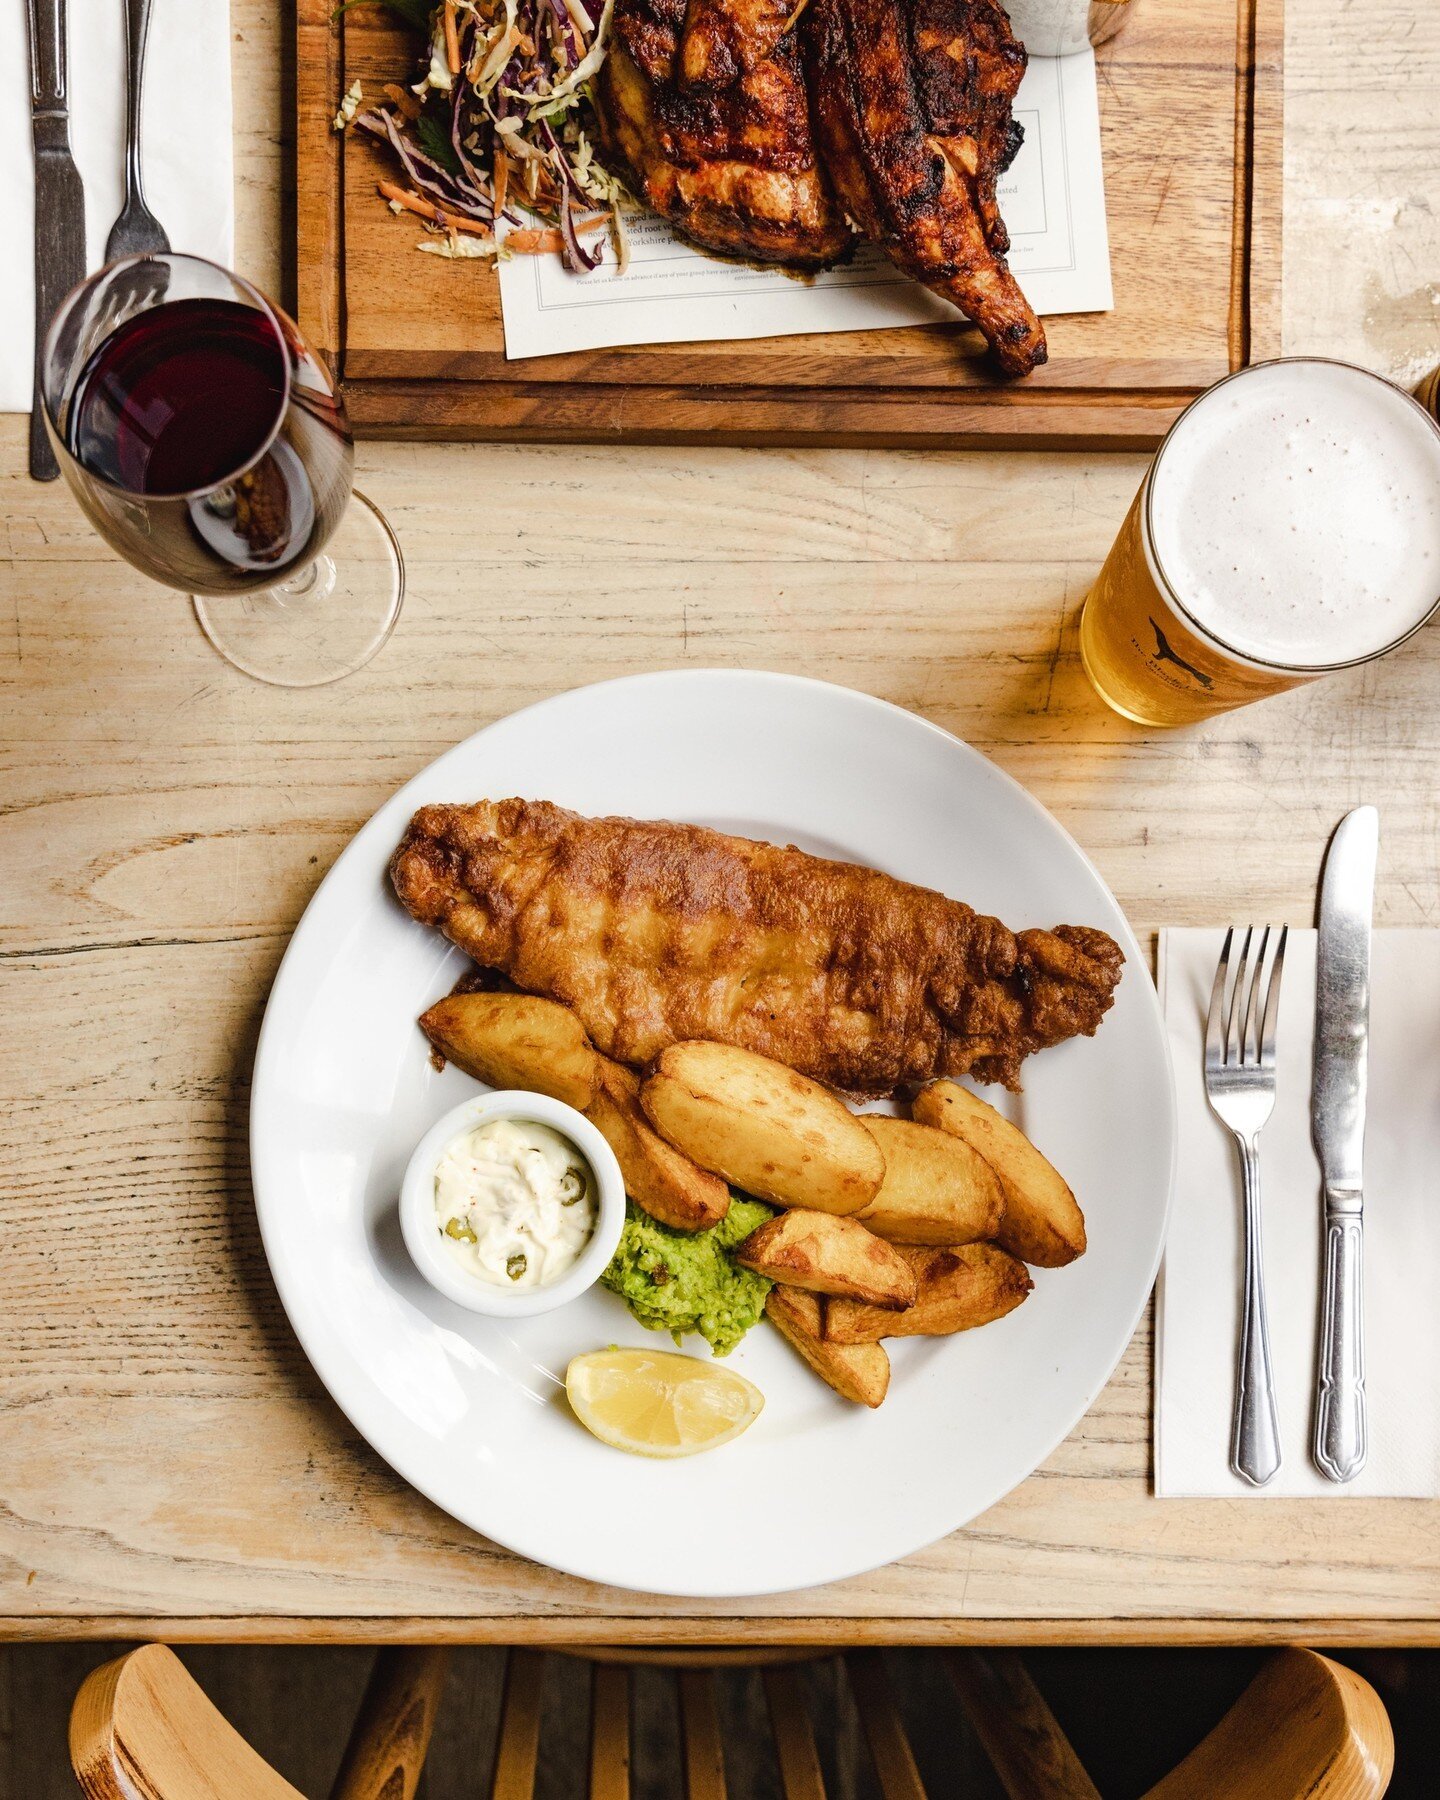 Dinner is ready! Delicious beer battered haddock, chips, mushy peas + tartare sauce. Washed down with some Black Dog Lager🍺